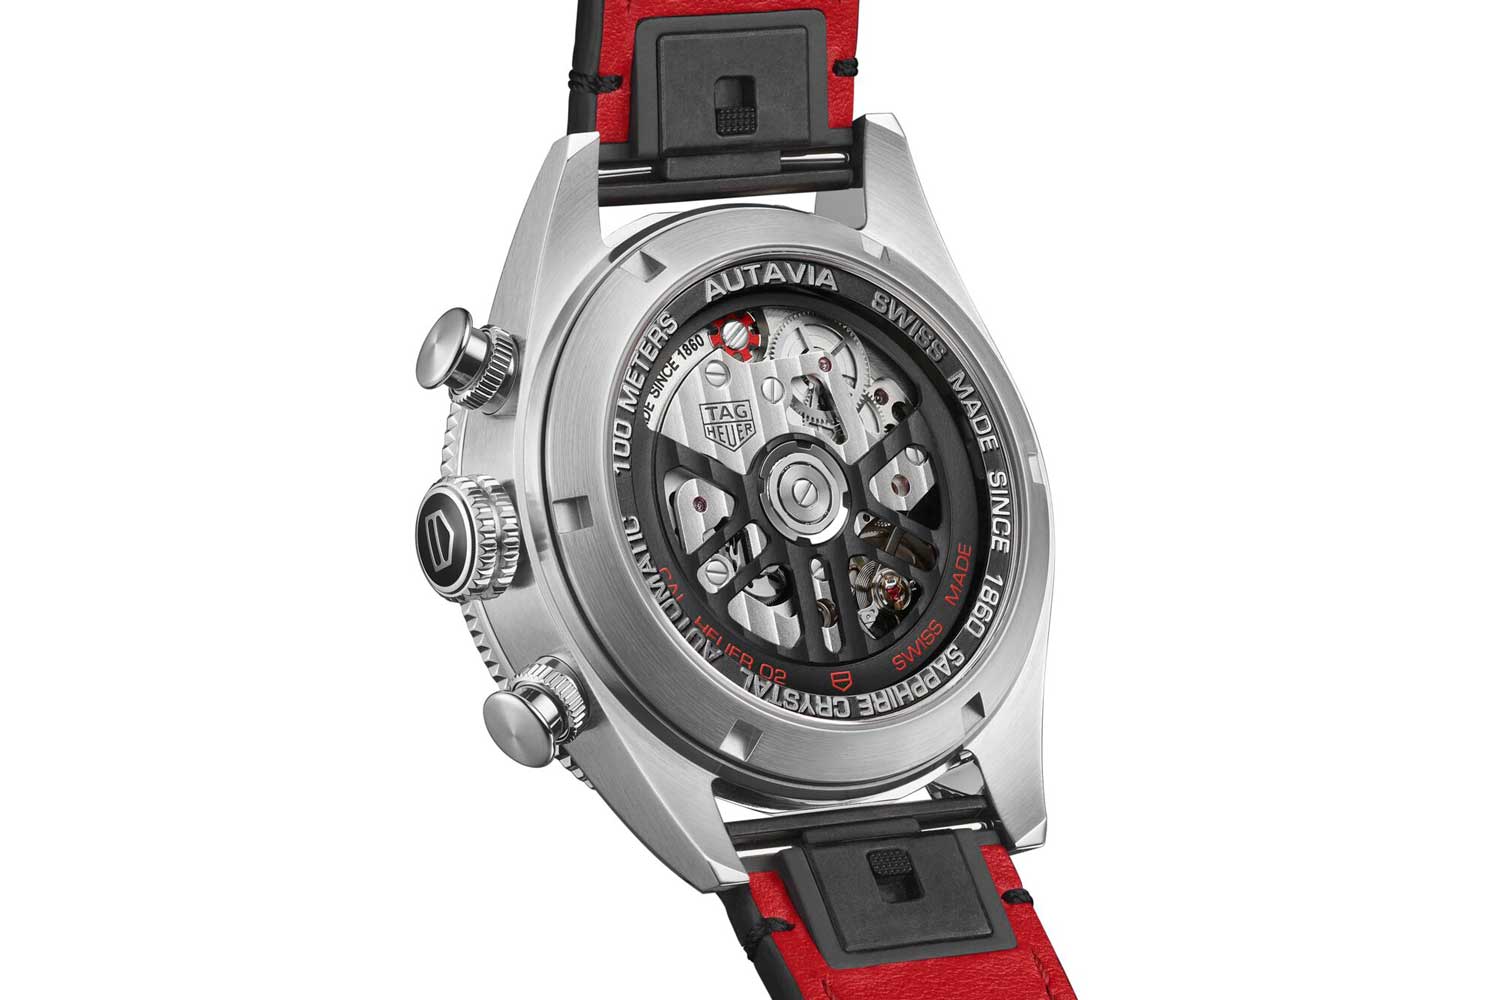 Sapphire caseback of the Autavia 60th Anniversary Flyback Chronograph reveals the Calibre Heuer 02 COSC Flyback movement, with column wheel marked in red